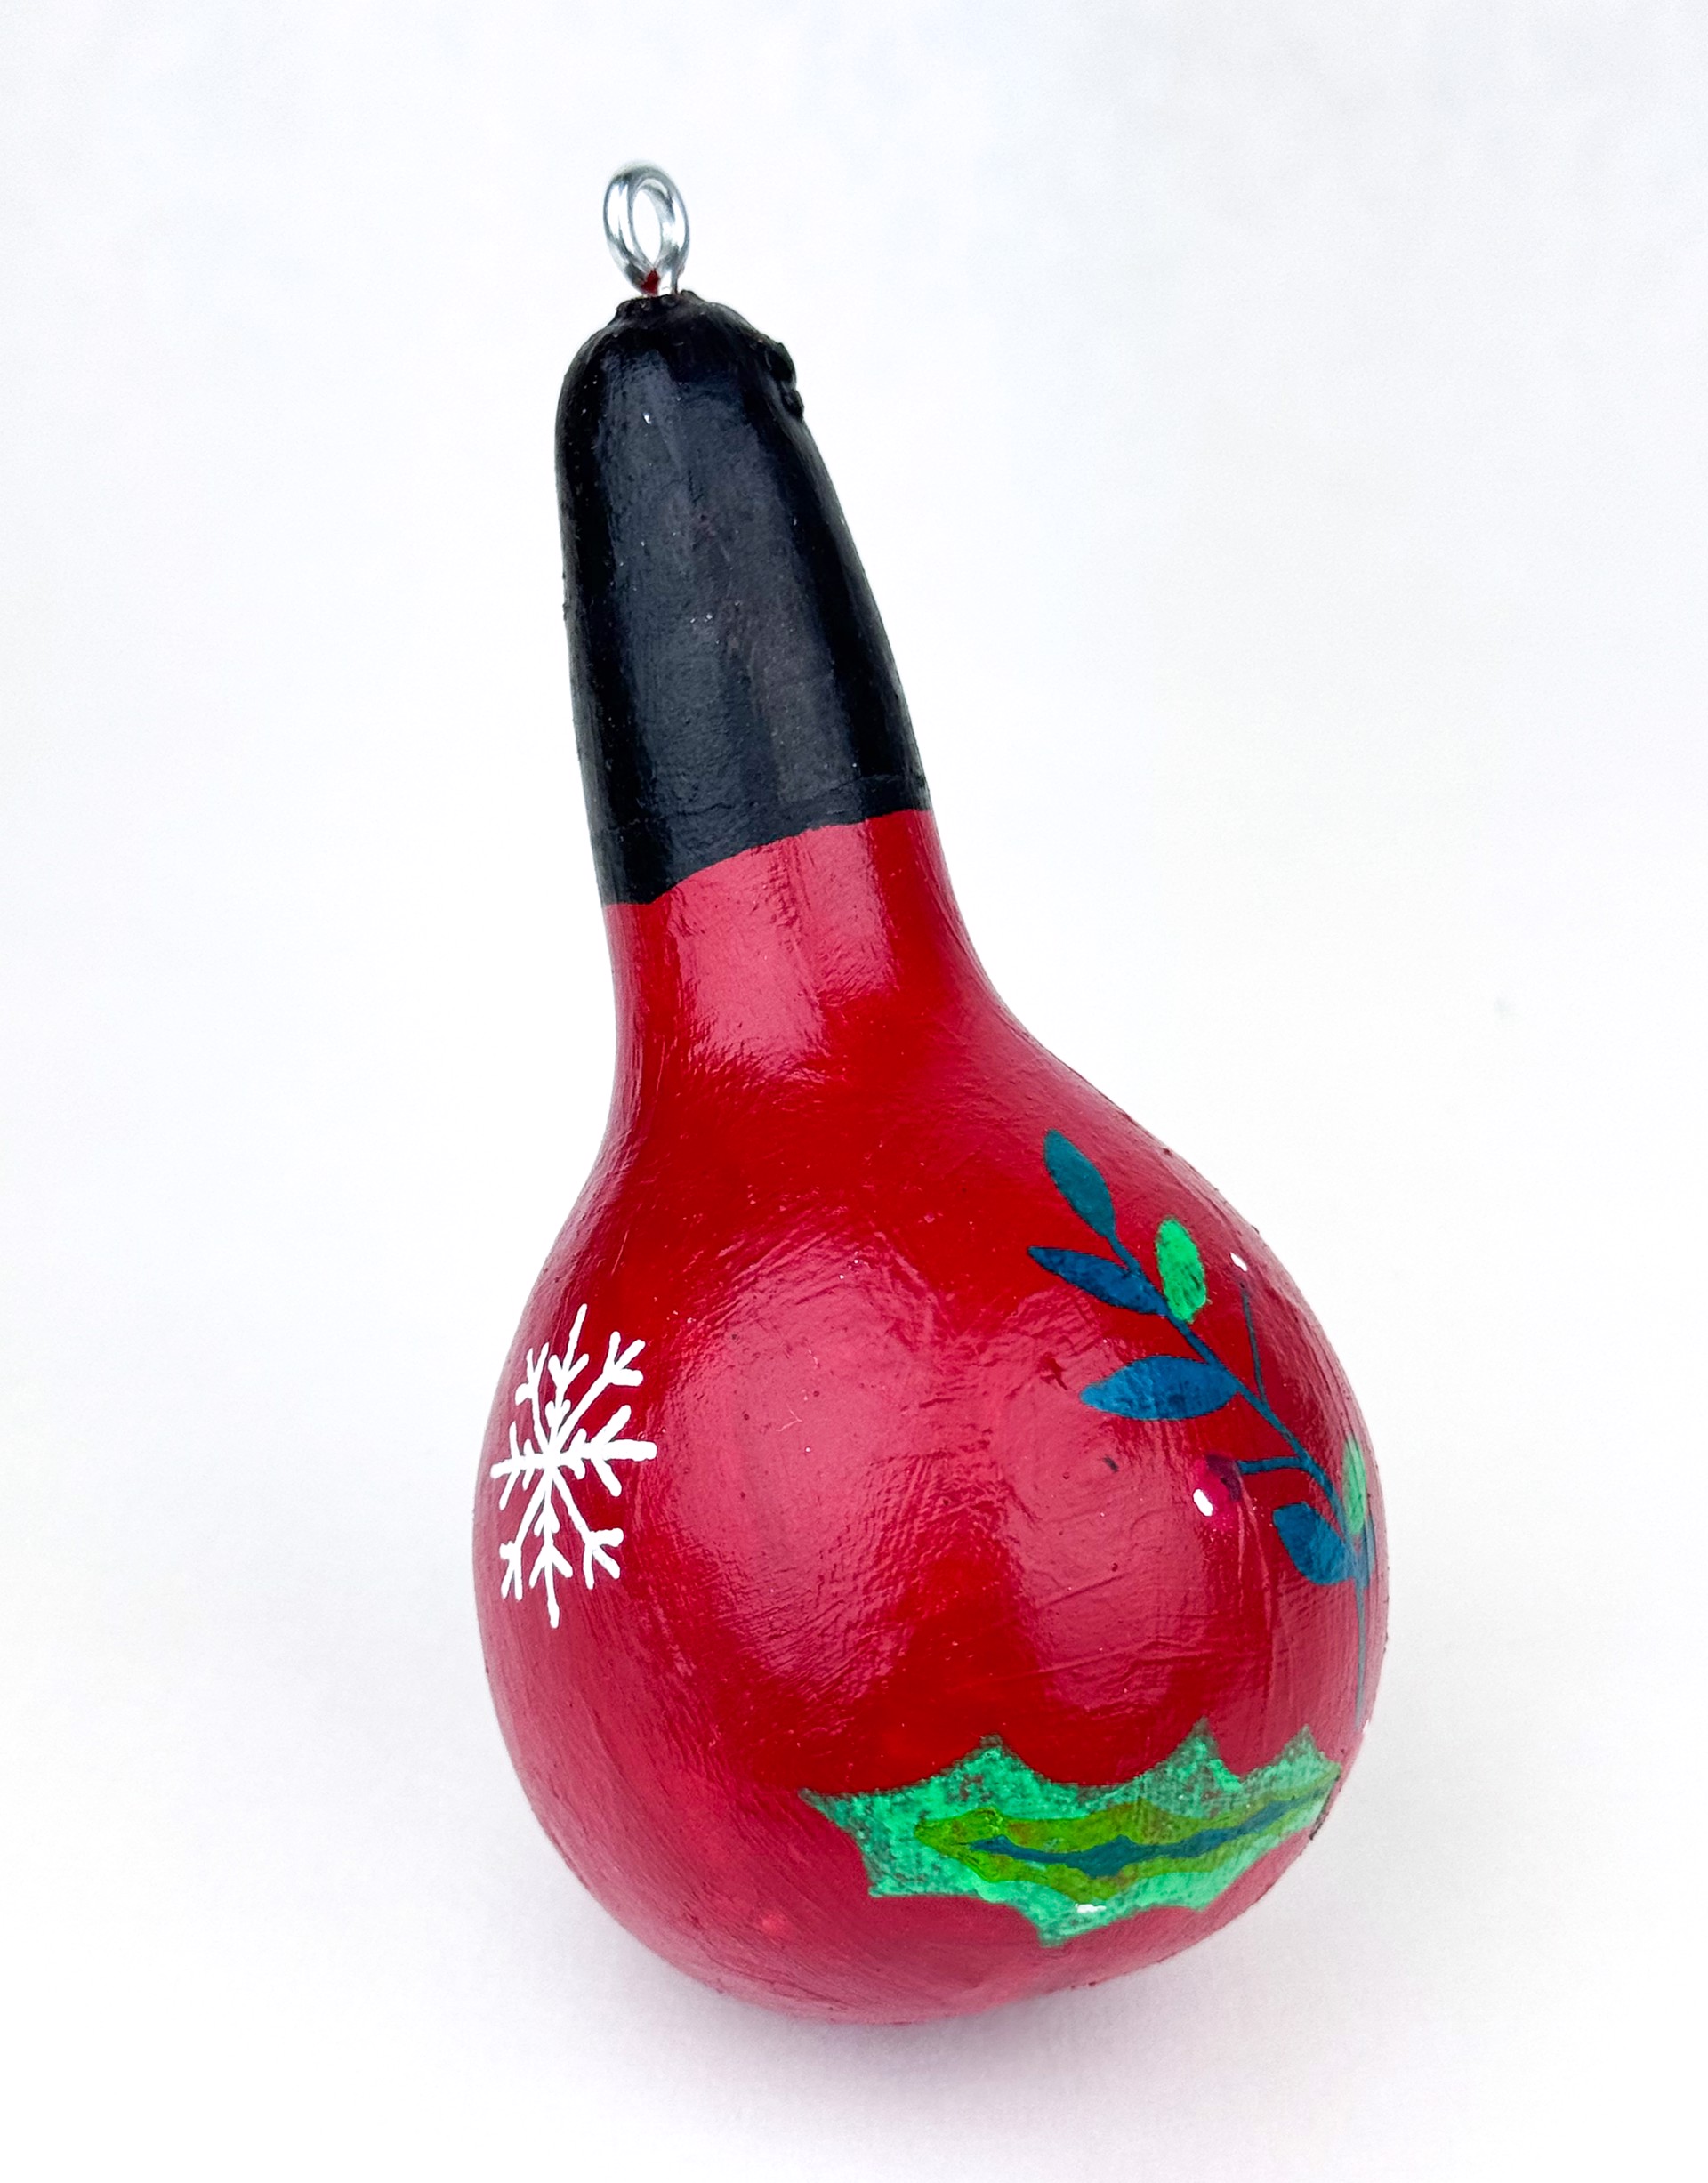 Holly-day (ornament) by Keith Lewis